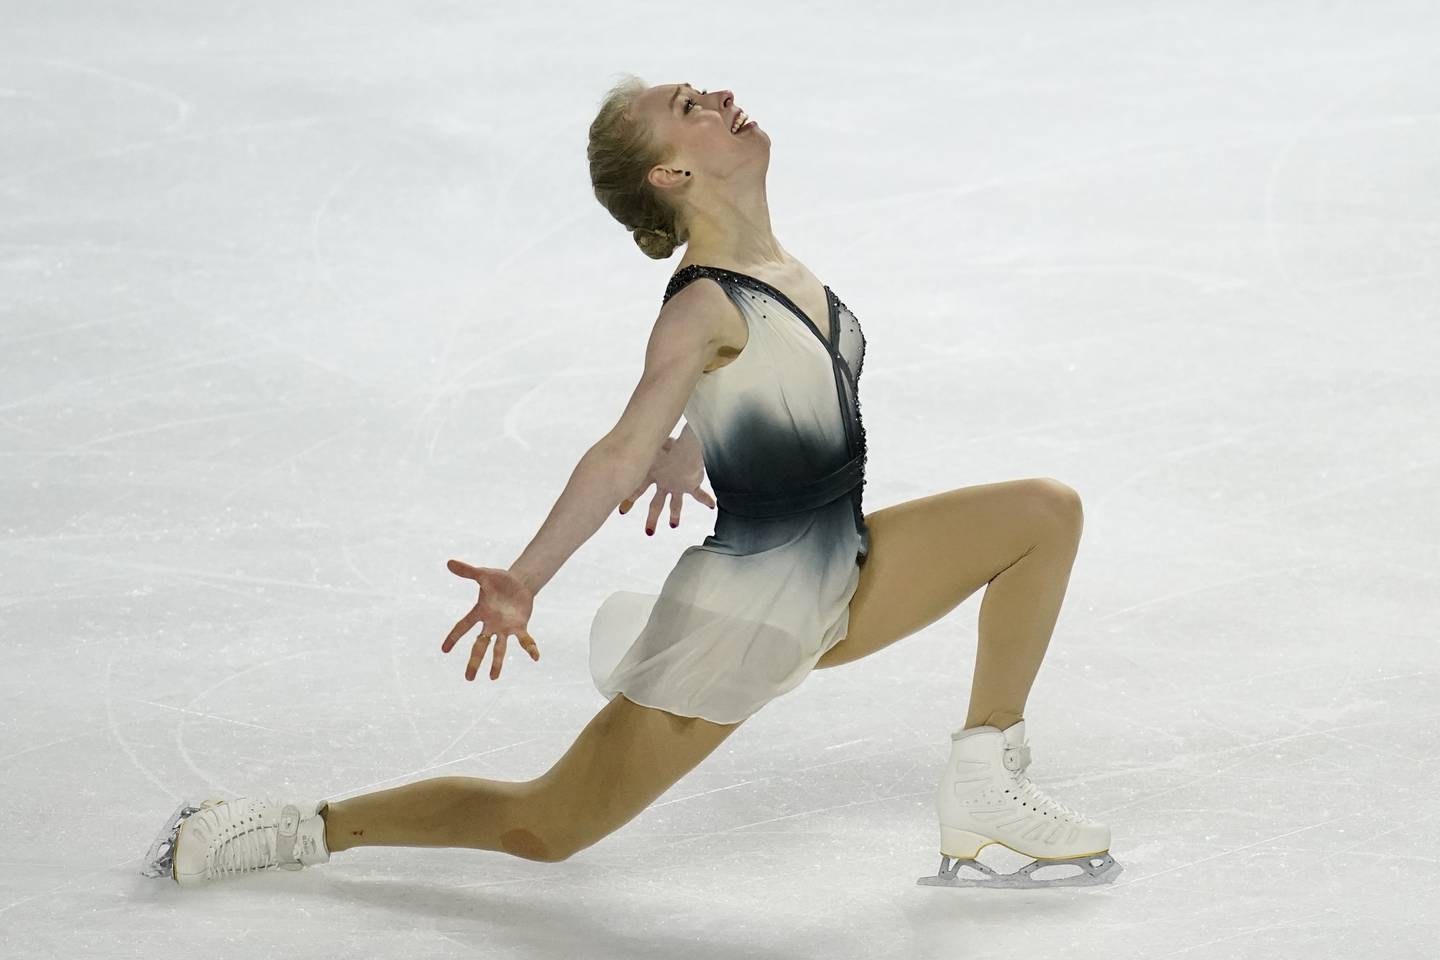 Bradie Tennell performs during the women's free skate at the U.S. Figure Skating Championships, Friday, Jan. 15, 2021, in Las Vegas.